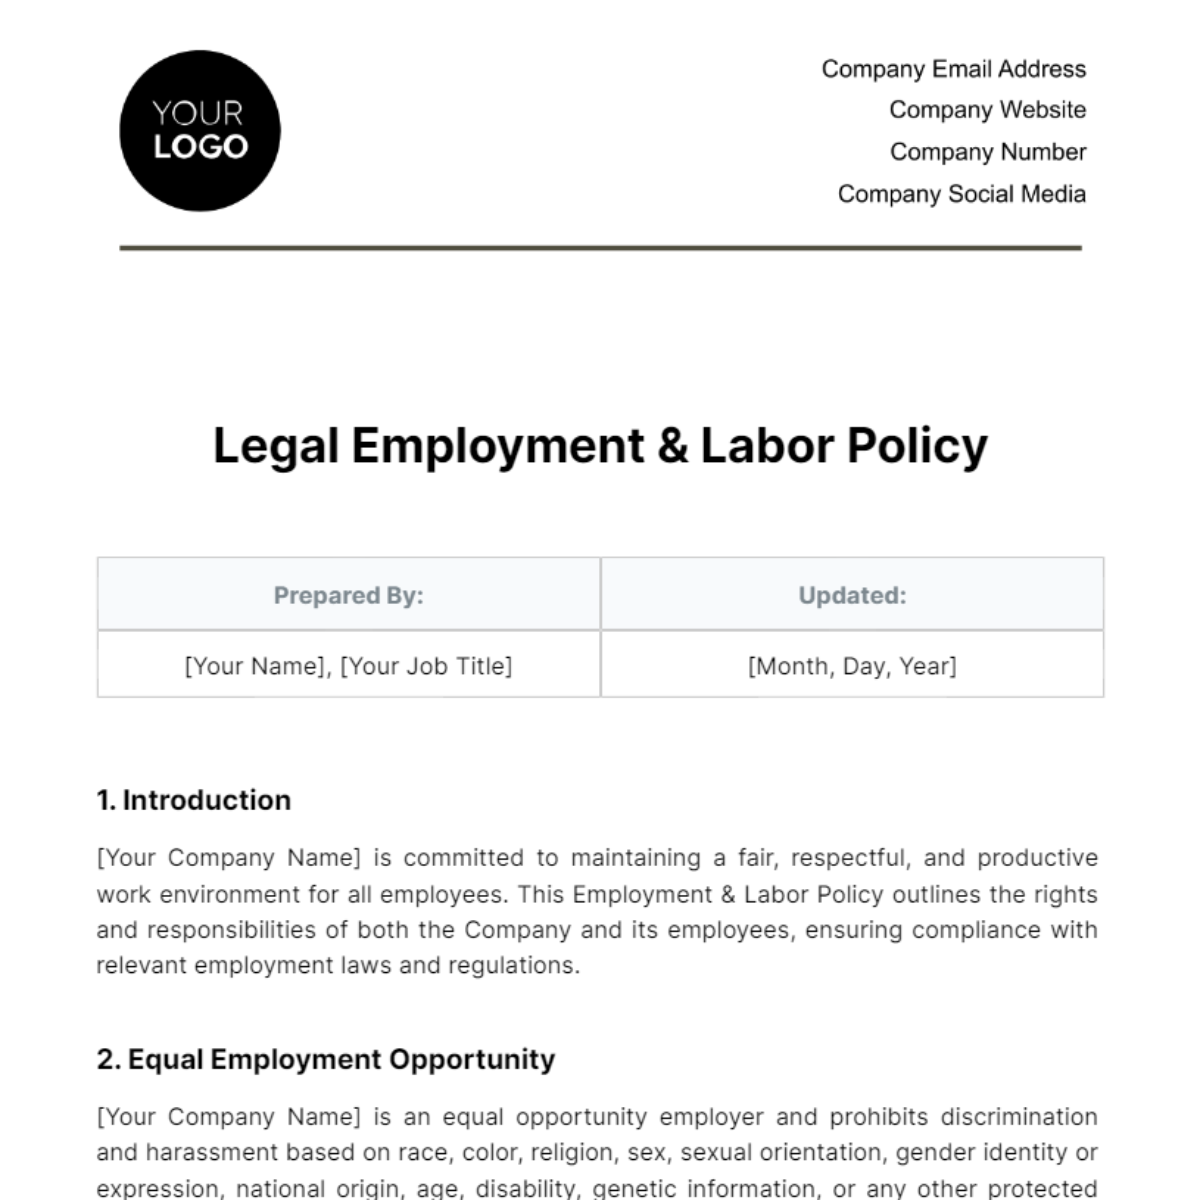 Free Legal Employment & Labor Policy Template